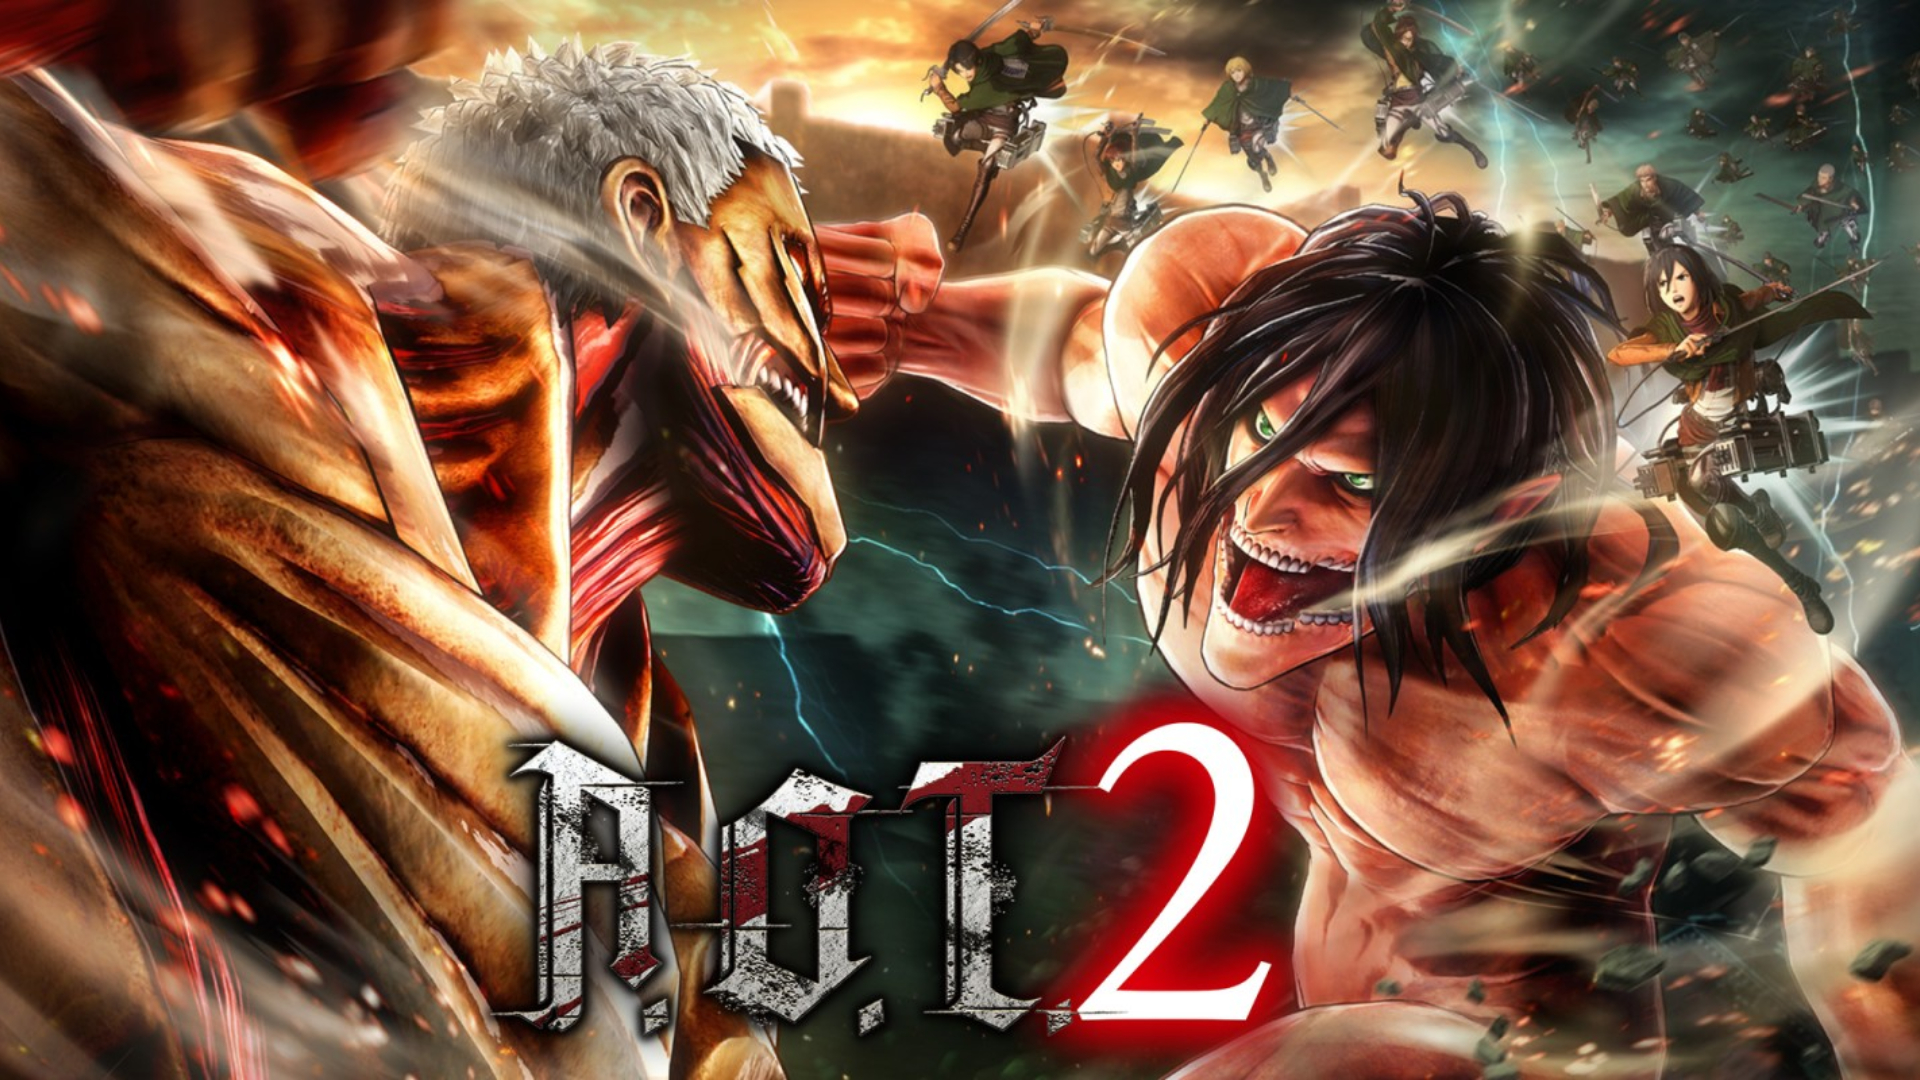 Best anime games: Attack on Titan 2. Image shows the game's logo and two titans fighting.